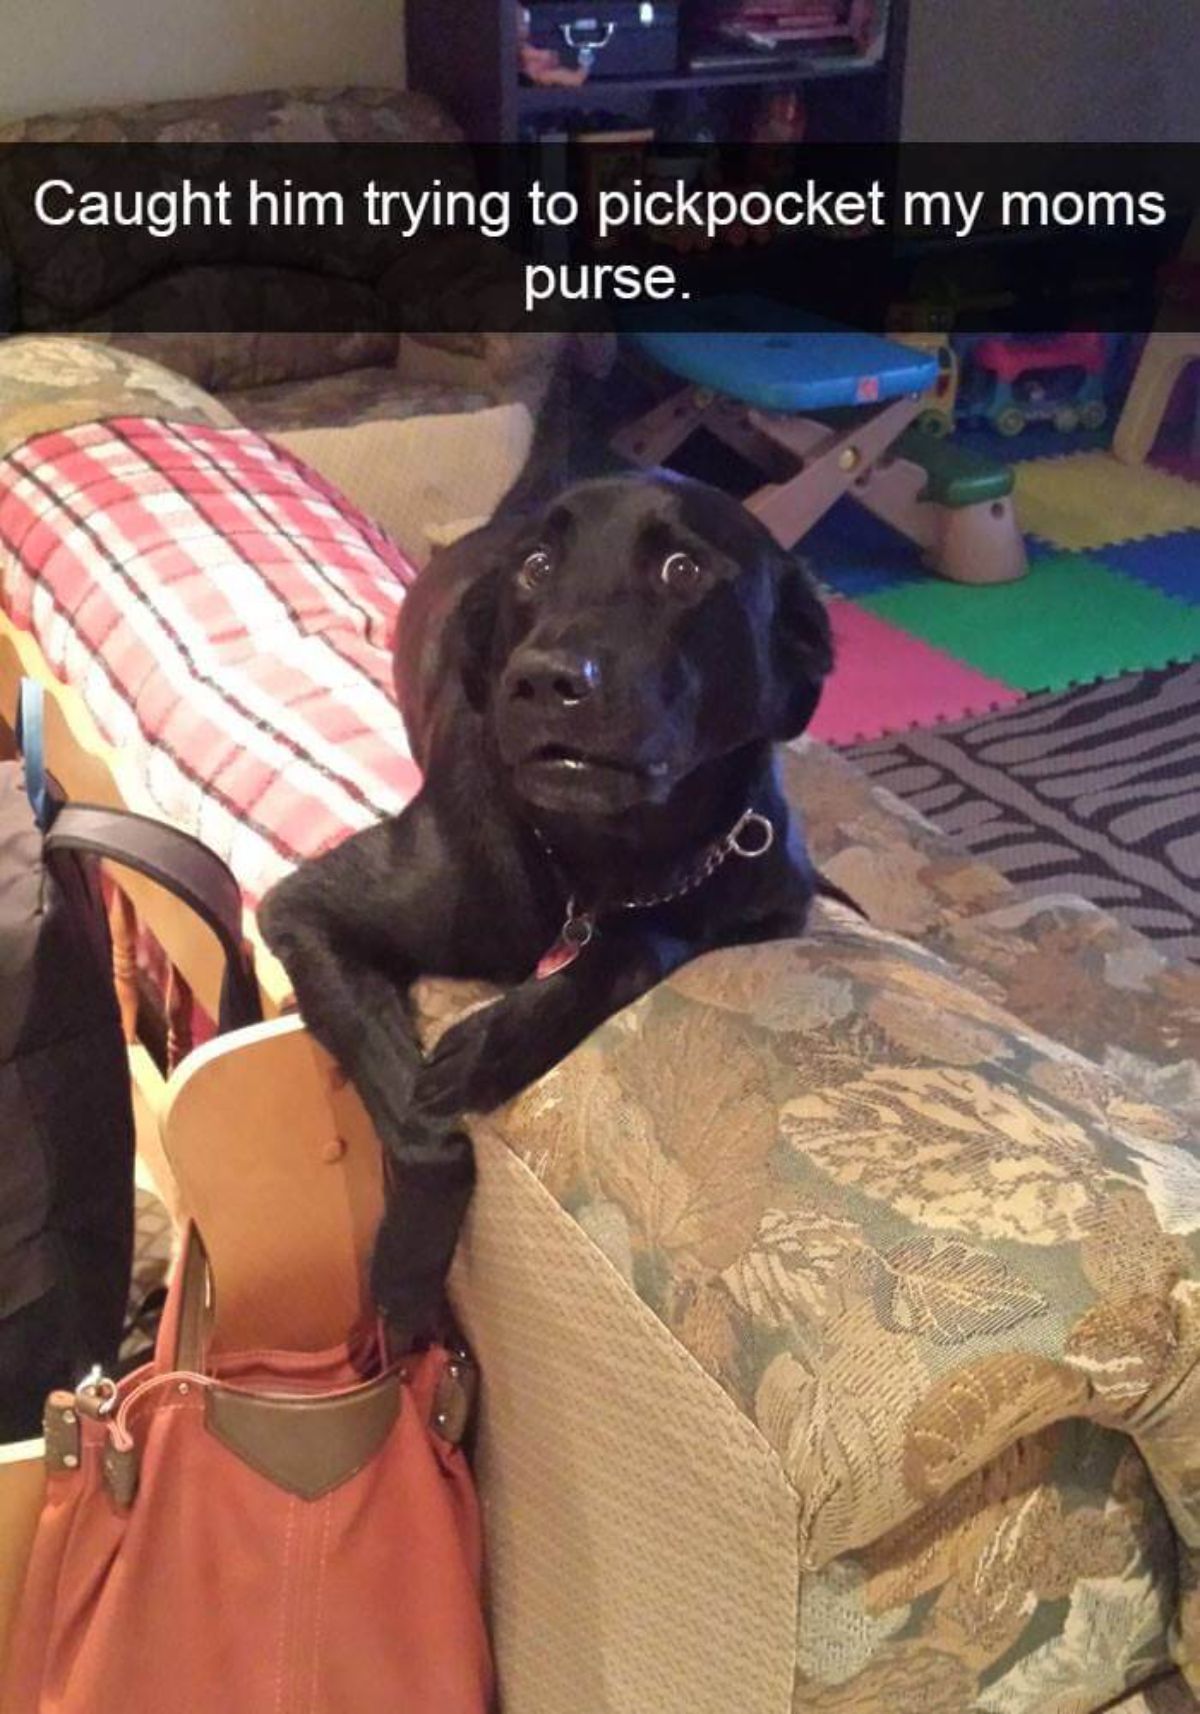 black labrador laying on the top of a gold and green sofa with one paw reaching into a pink and brown handbag and the dog looks surprised with a caption saying caught him trying to pickpocket my moms purse